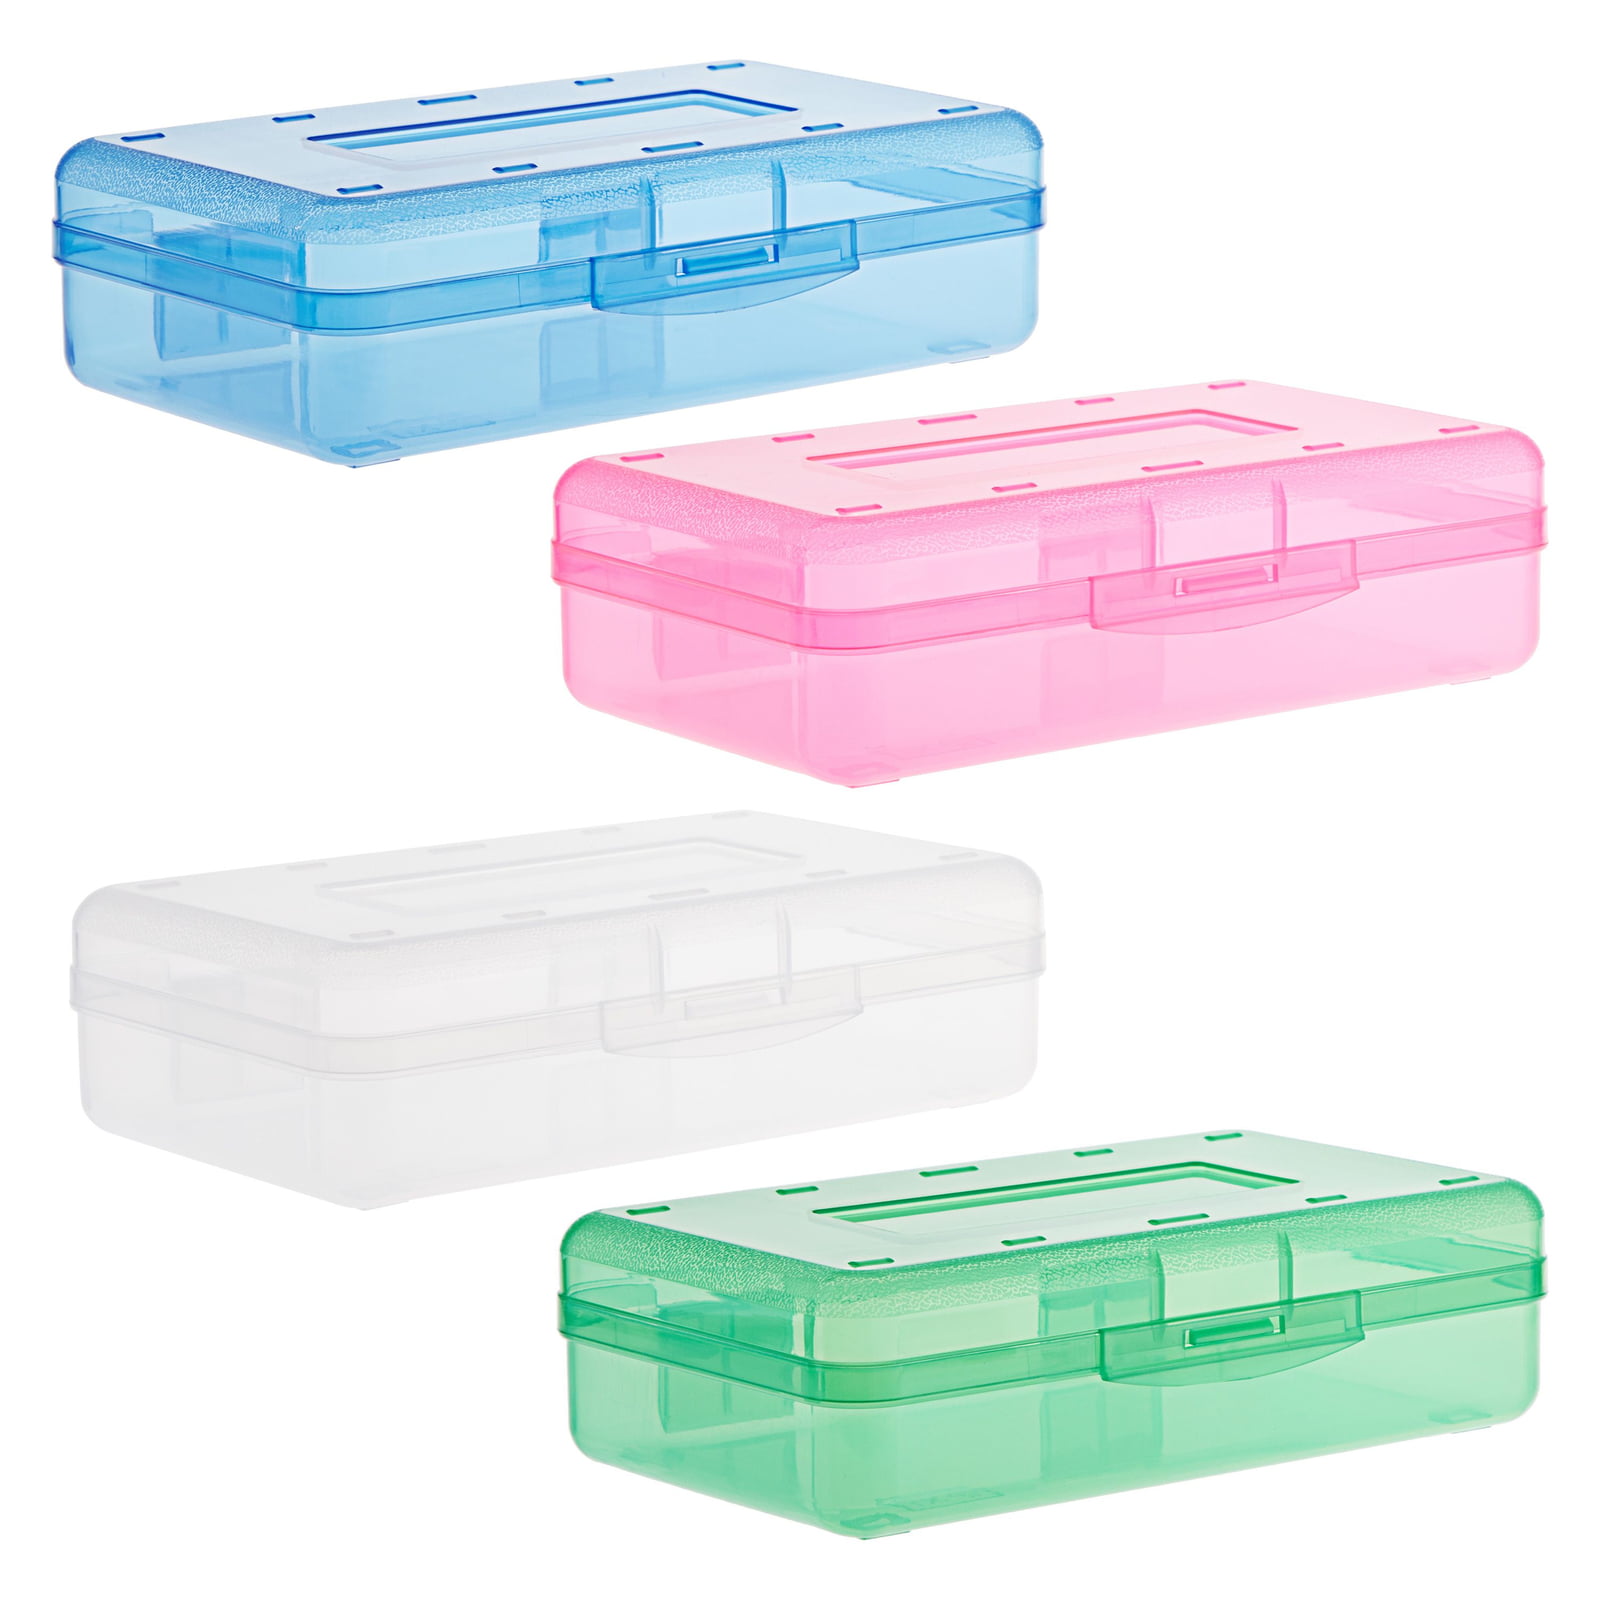 School Pencil Cases 7.75 x 4.5 x 2.25 Inches, 4-Pack Pencil Boxes 4 Colors 